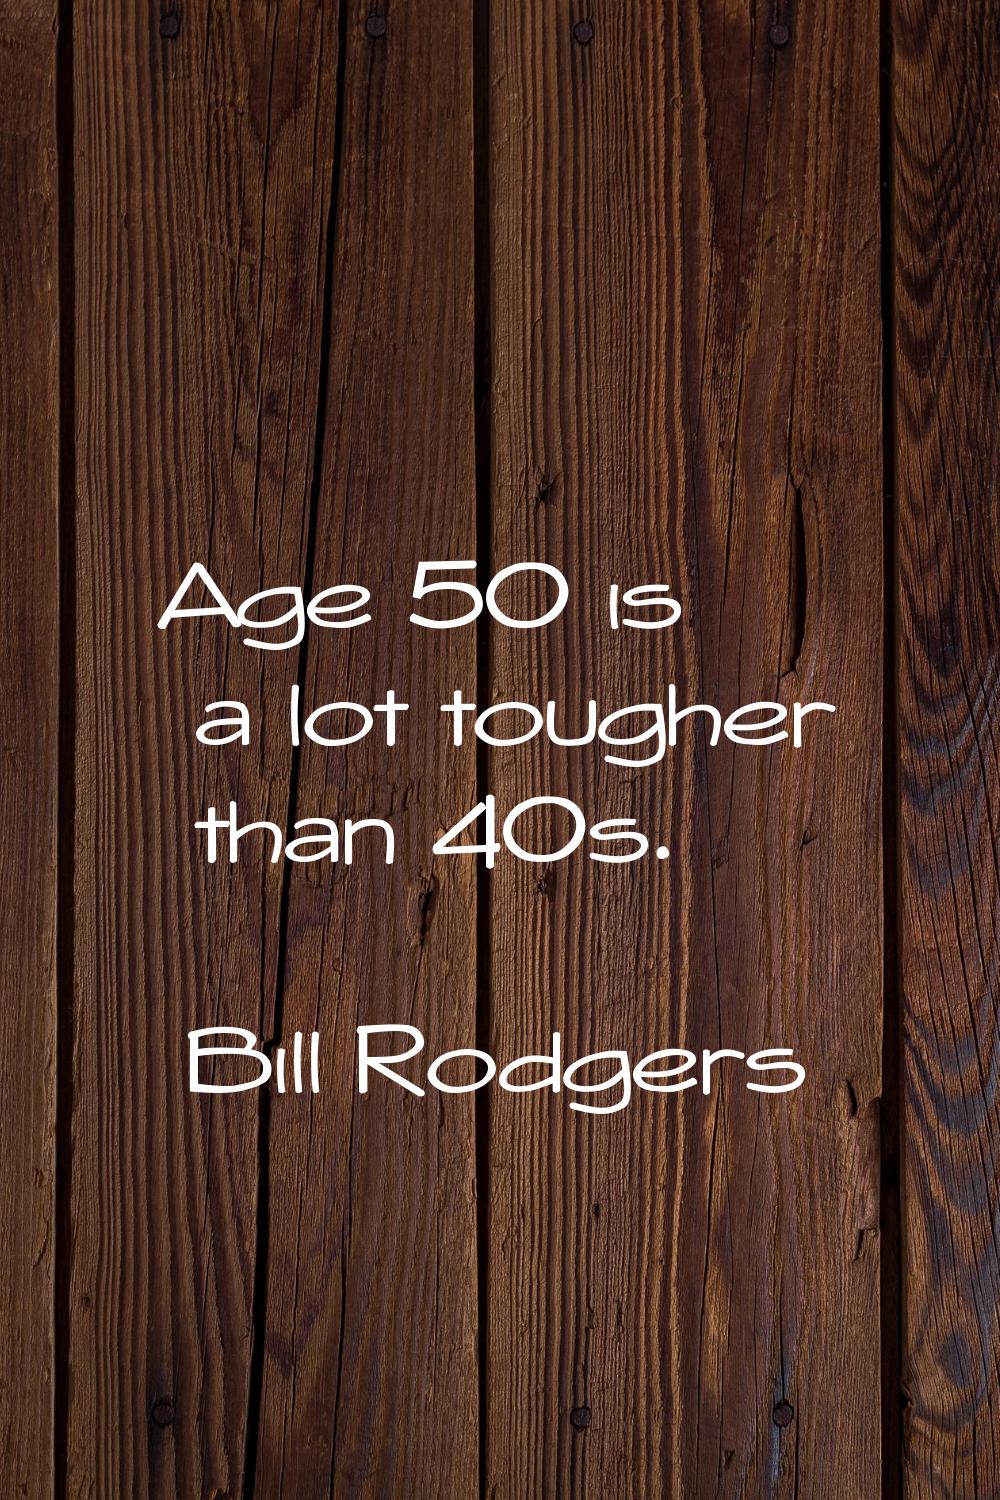 Age 50 is a lot tougher than 40s.